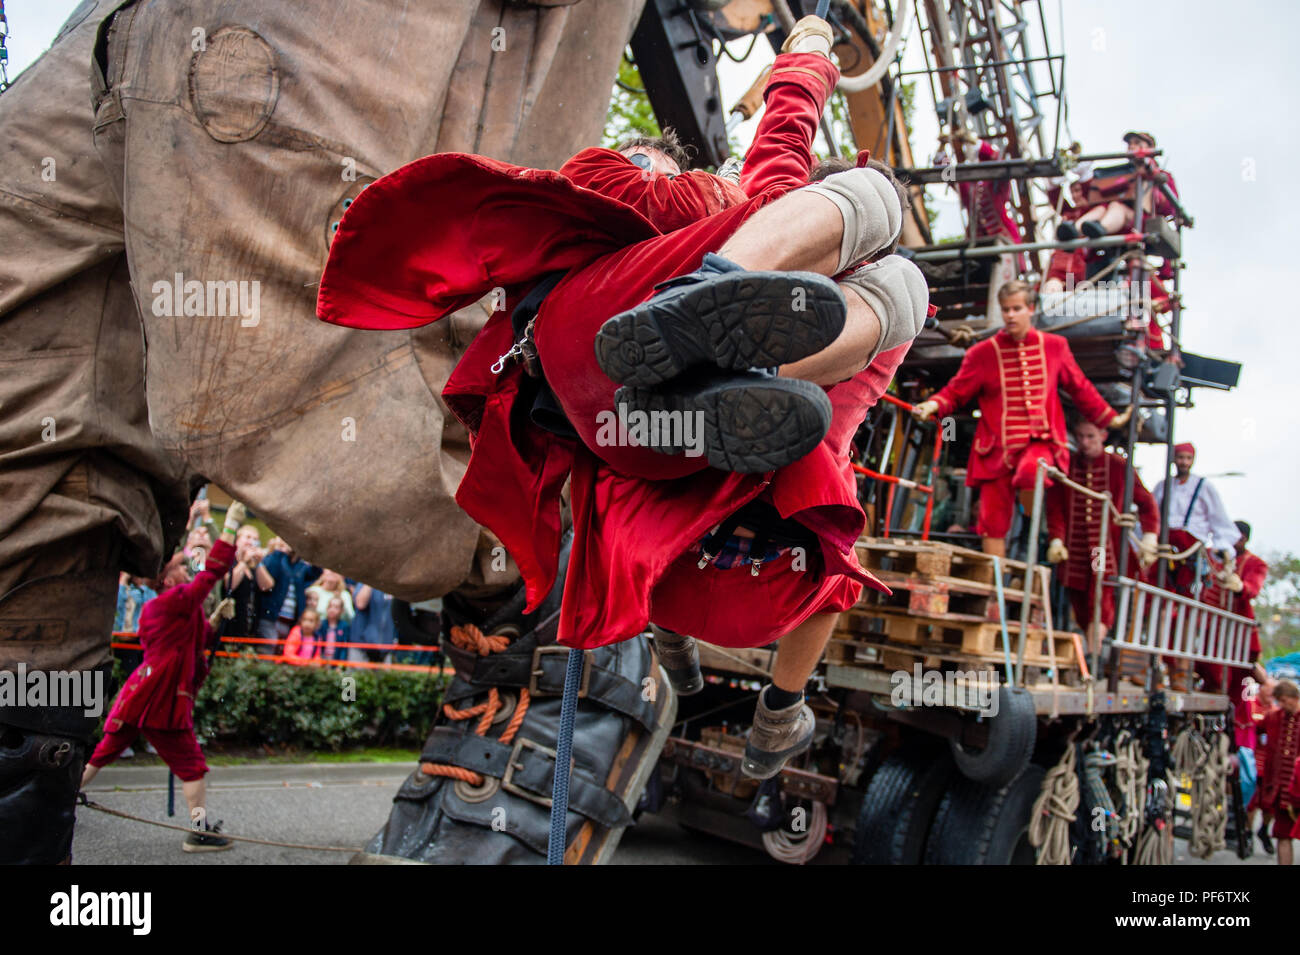 Leeuwarden, The Netherlands, 19th August, 2018. The world-famous production of Royal de Luxe makes its Dutch premiere in the European Capital of Culture. Over the course of three days, these towering giants walk the streets of Leeuwarden and provide an unforgettable experience with their 'Big Skate in the Ice' show. Royal de Luxe is an extraordinary street theatre company. The company flies around the world with their impressive Giants, puppets several meters high and taller than the buildings around them. Credit: Ricardo Hernandez/Alamy Live News Stock Photo